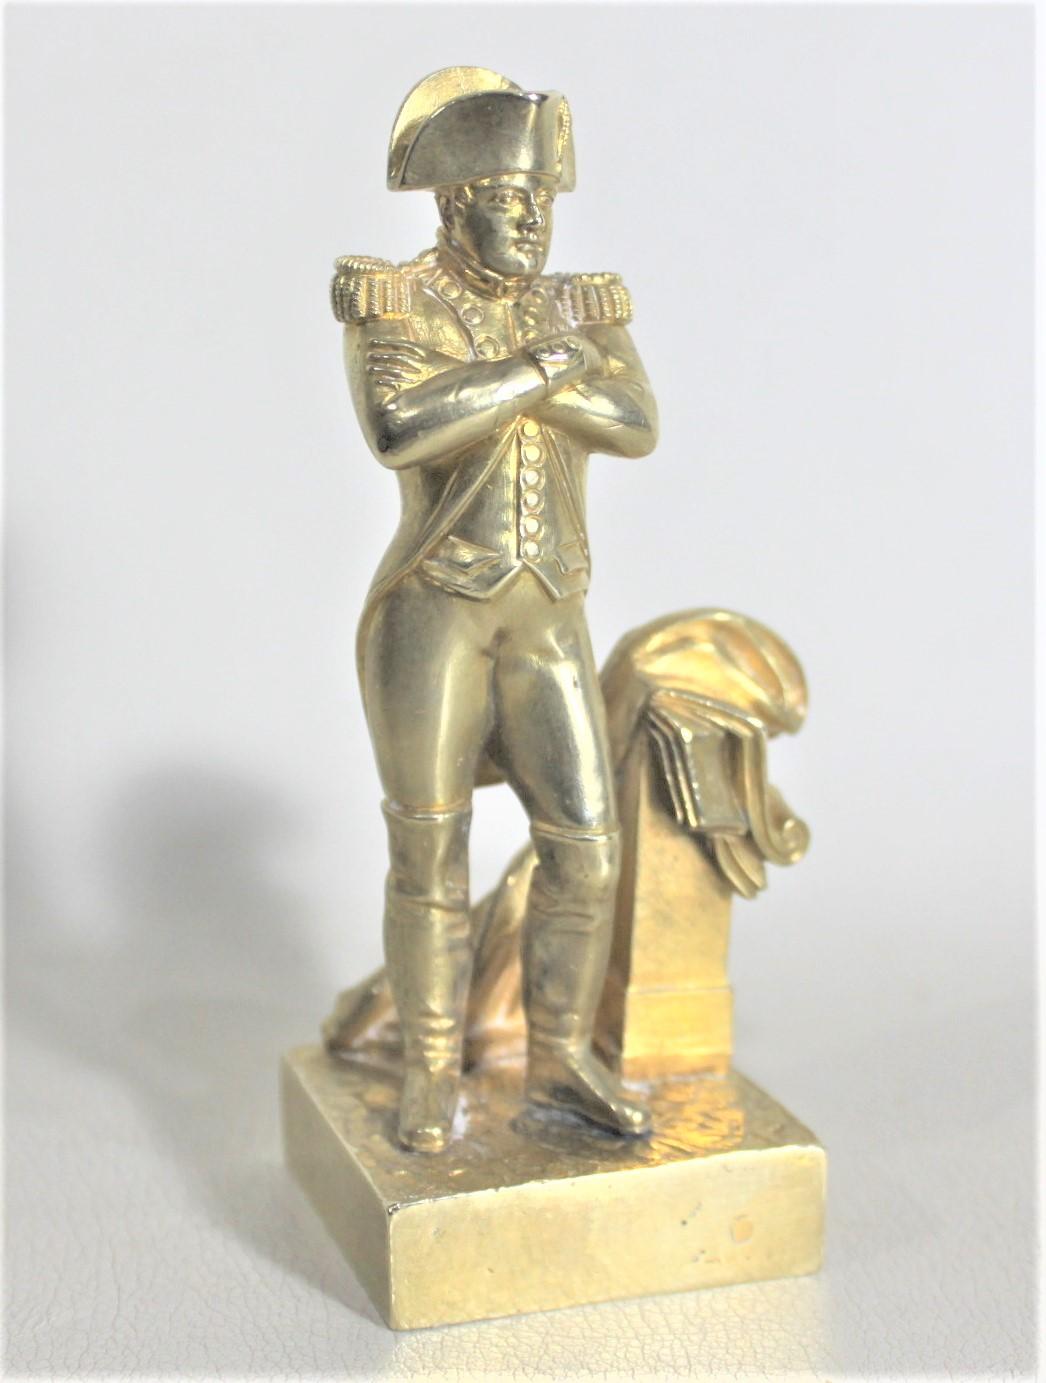 This well executed gilt bronze sculpture is unsigned, but presumed to have been made in France in approximately 1890 in the Epoch era style. This miniature gilt bronze depicts Napoleon in his uniform and is very detailed on all sides.